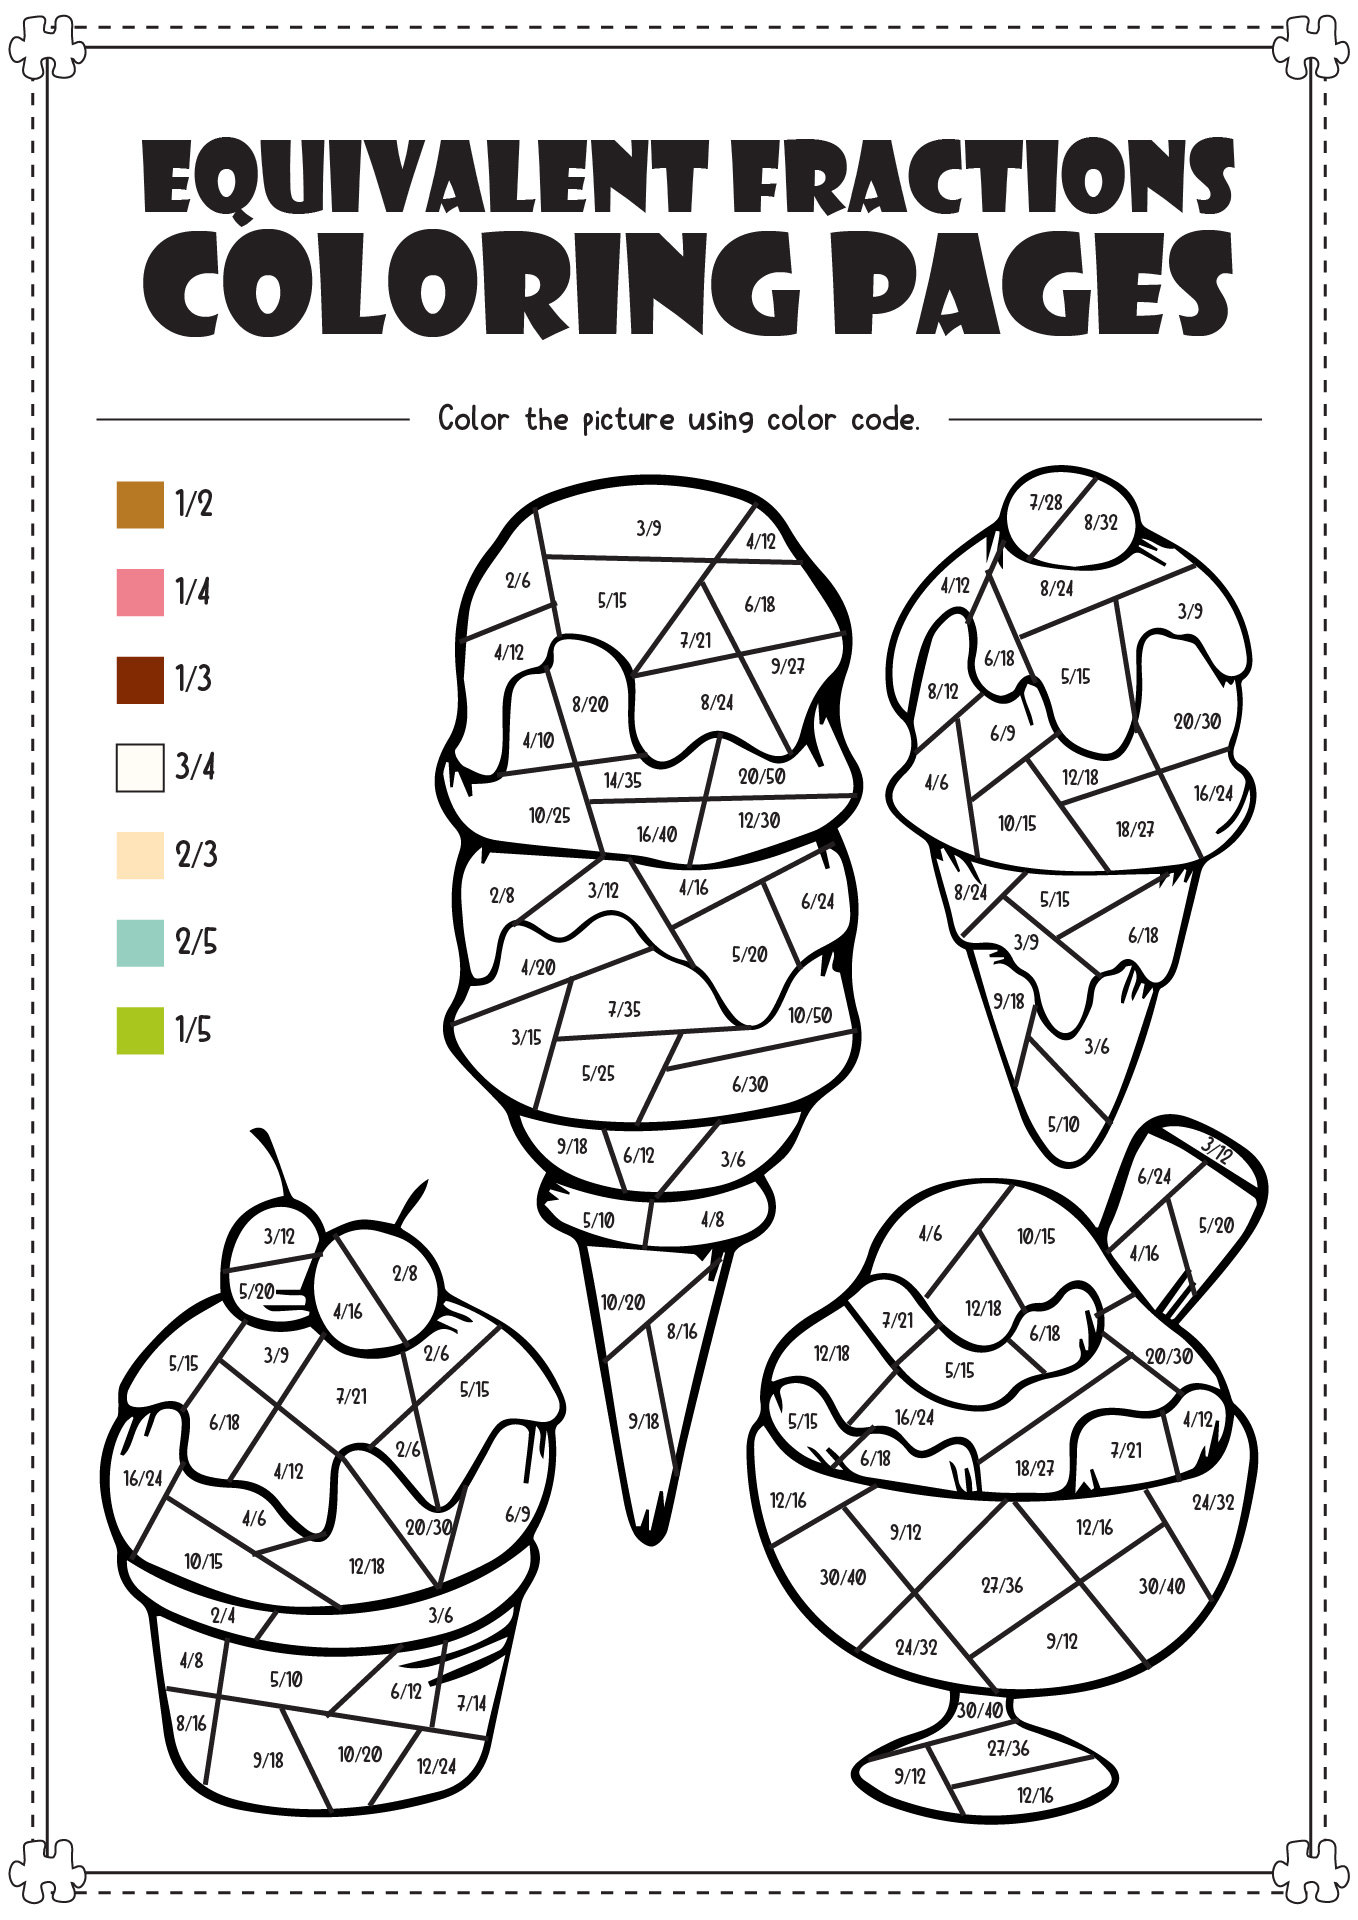 Equivalent Fractions Coloring Pages